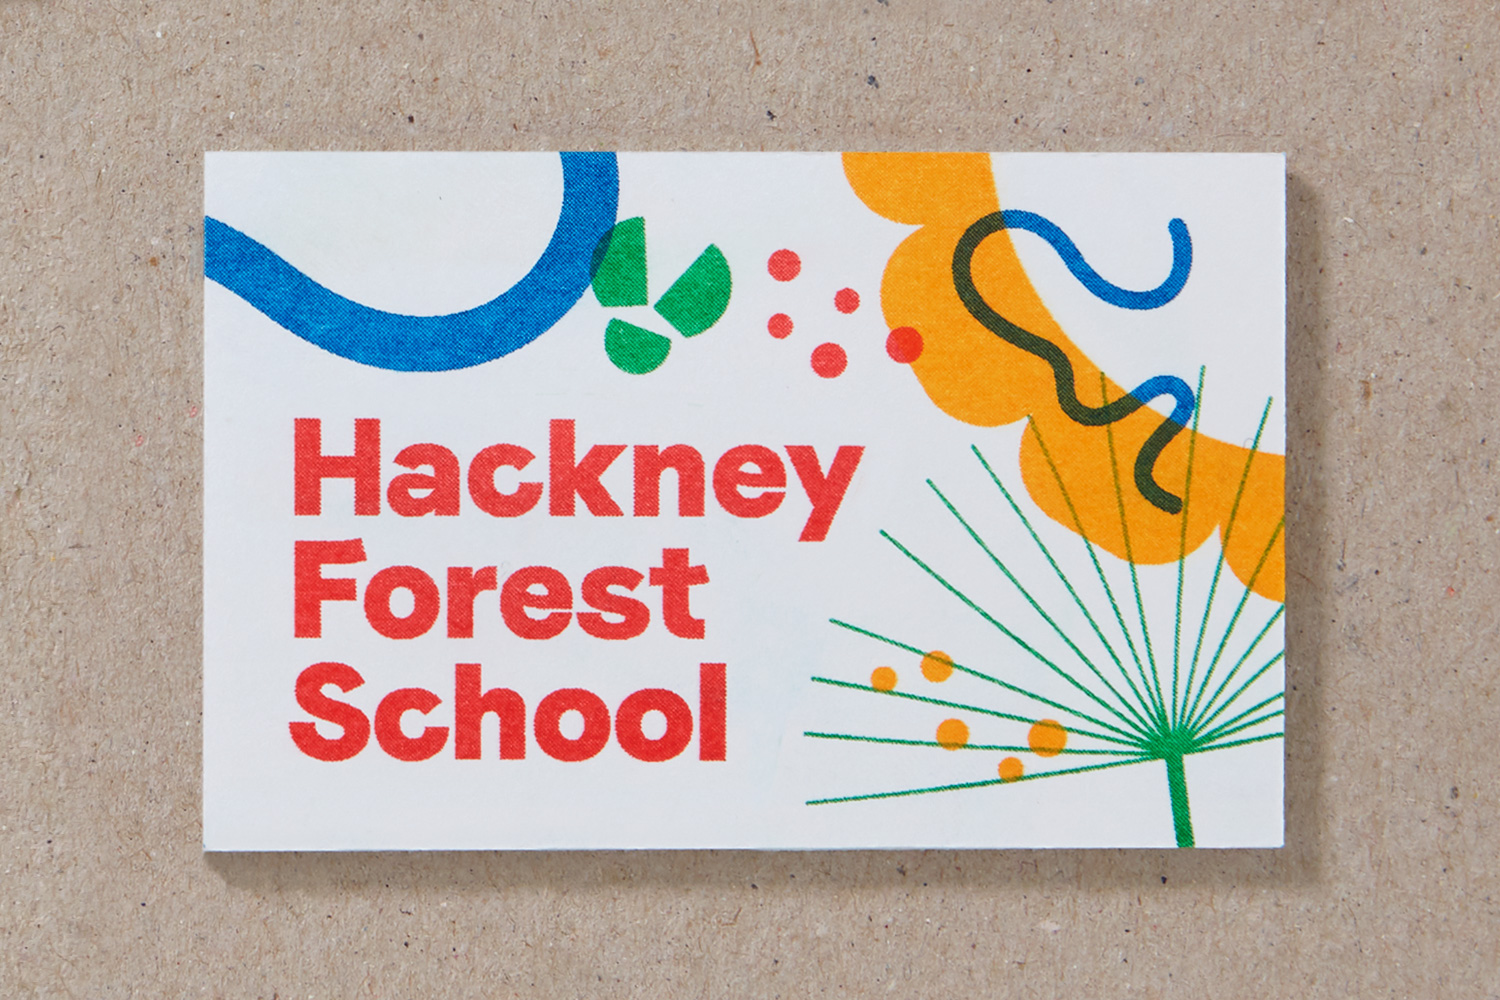 Riso printed business card designed by Spy for Hackney Forest School